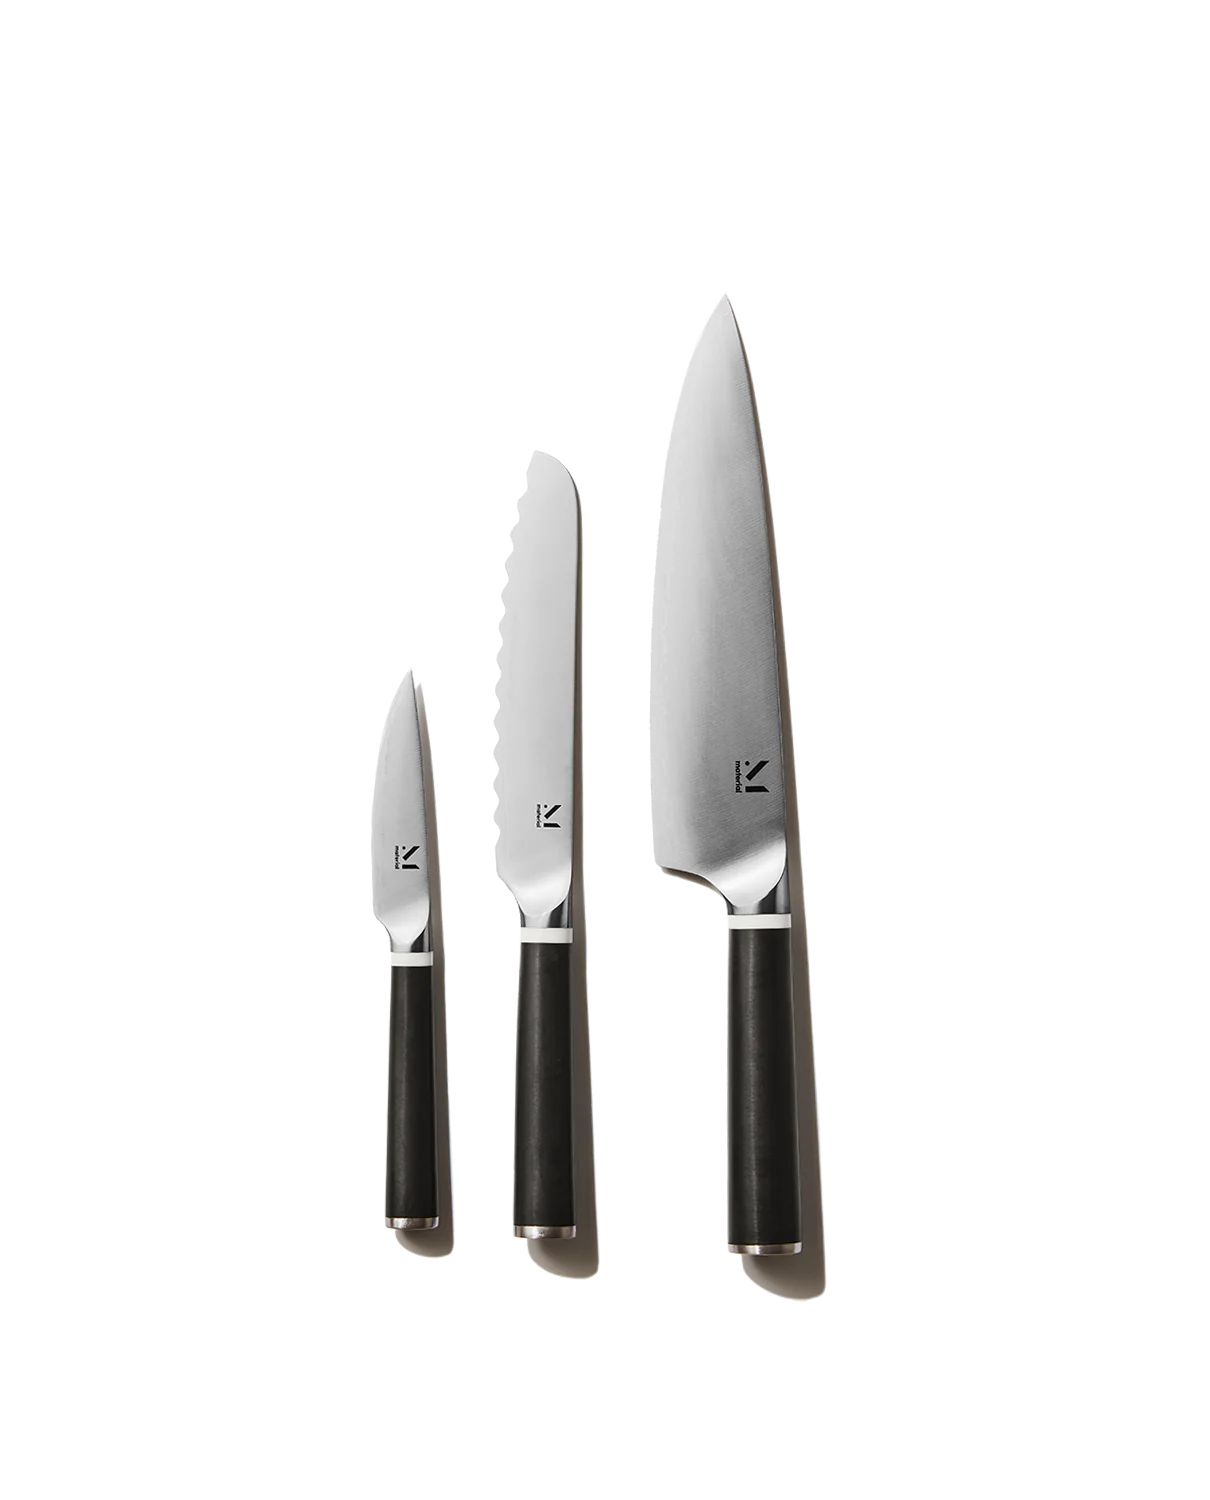 The Knives: Thoughtfully Designed, Affordably Priced | Material